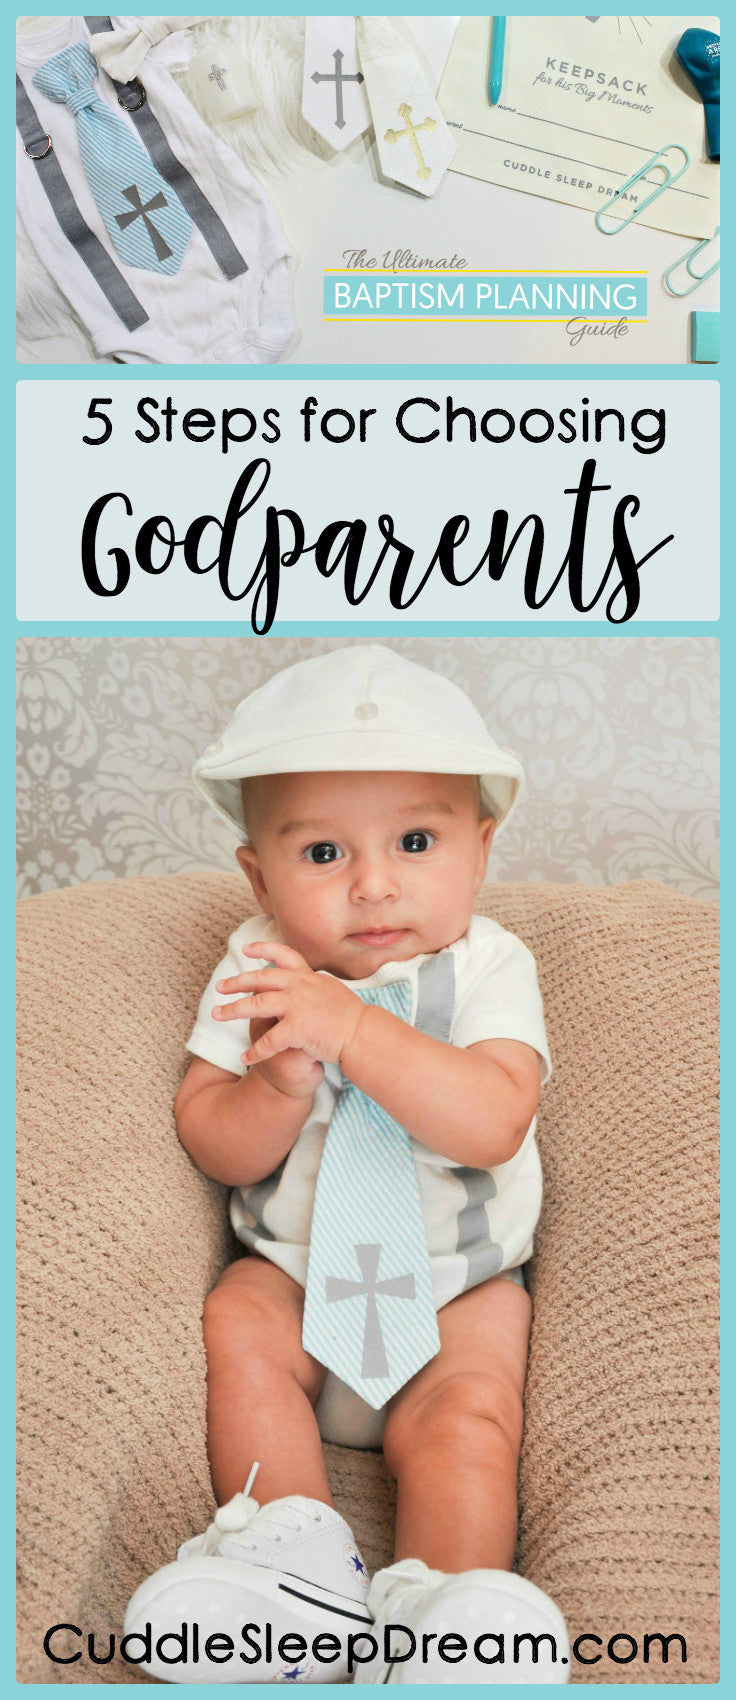 Choosing godparents advice and tips